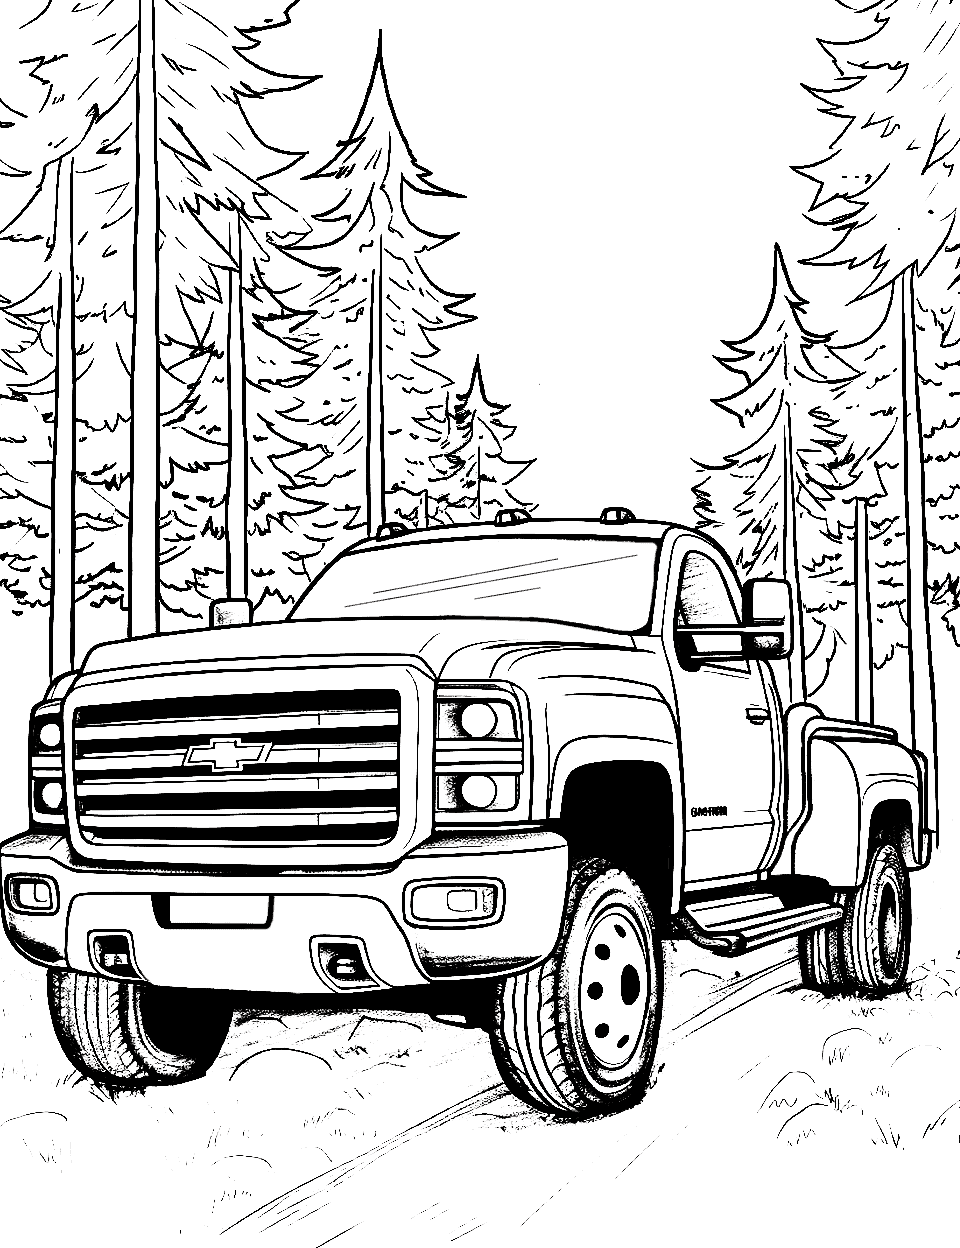 Silverado in the Forest Coloring Page - A Chevrolet Silverado making its way through a light and airy forest.